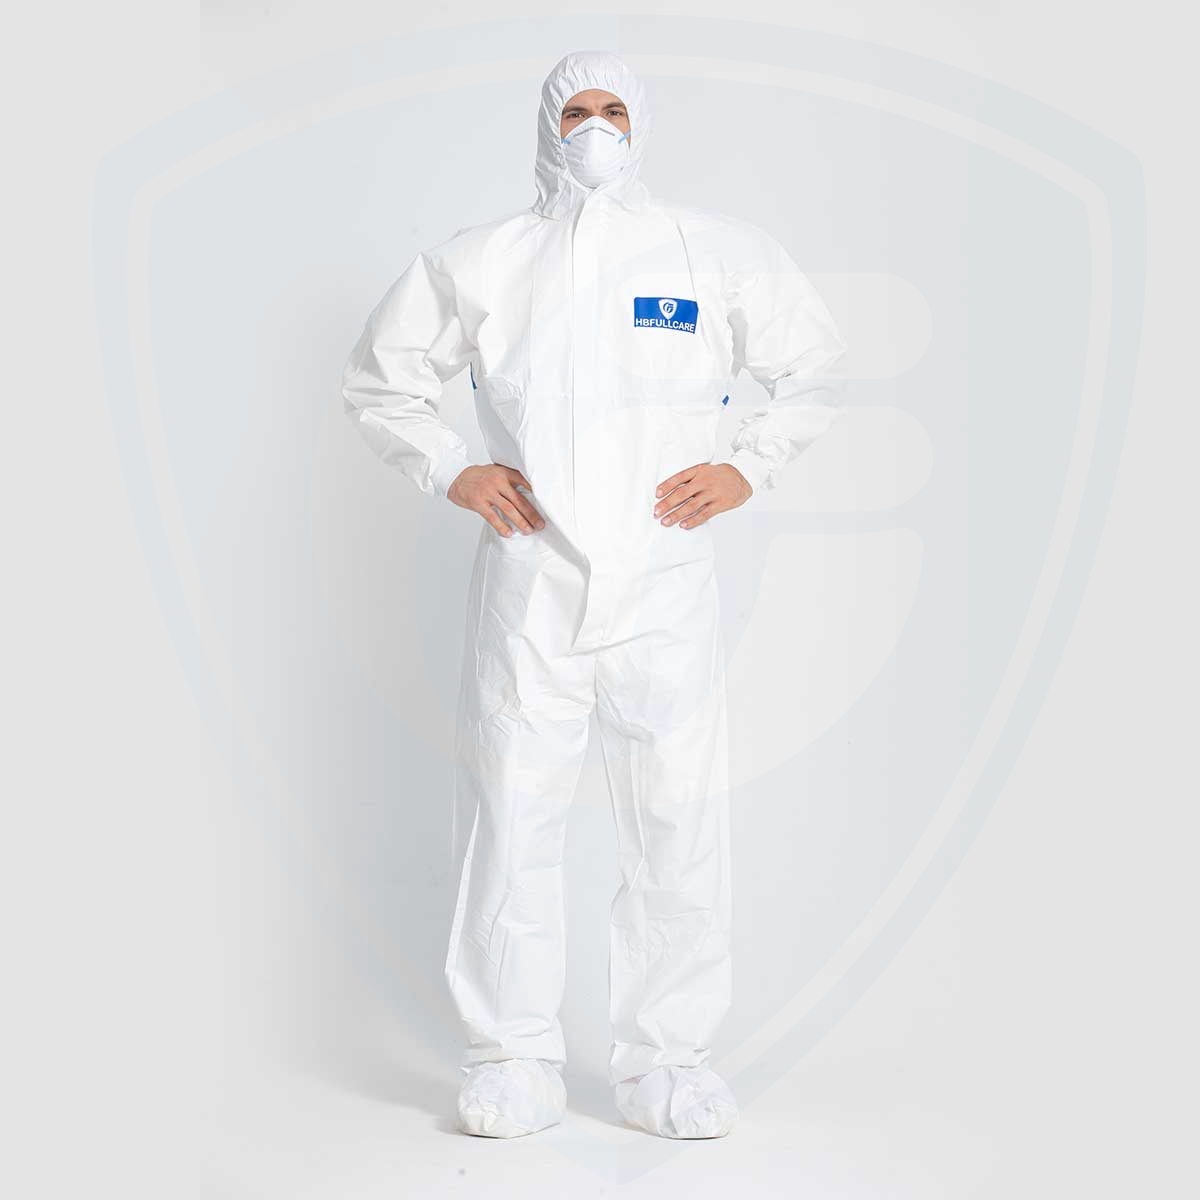 Type 5/6 Spray Painting Combinaisons de protection jetables Safety WorkWear White